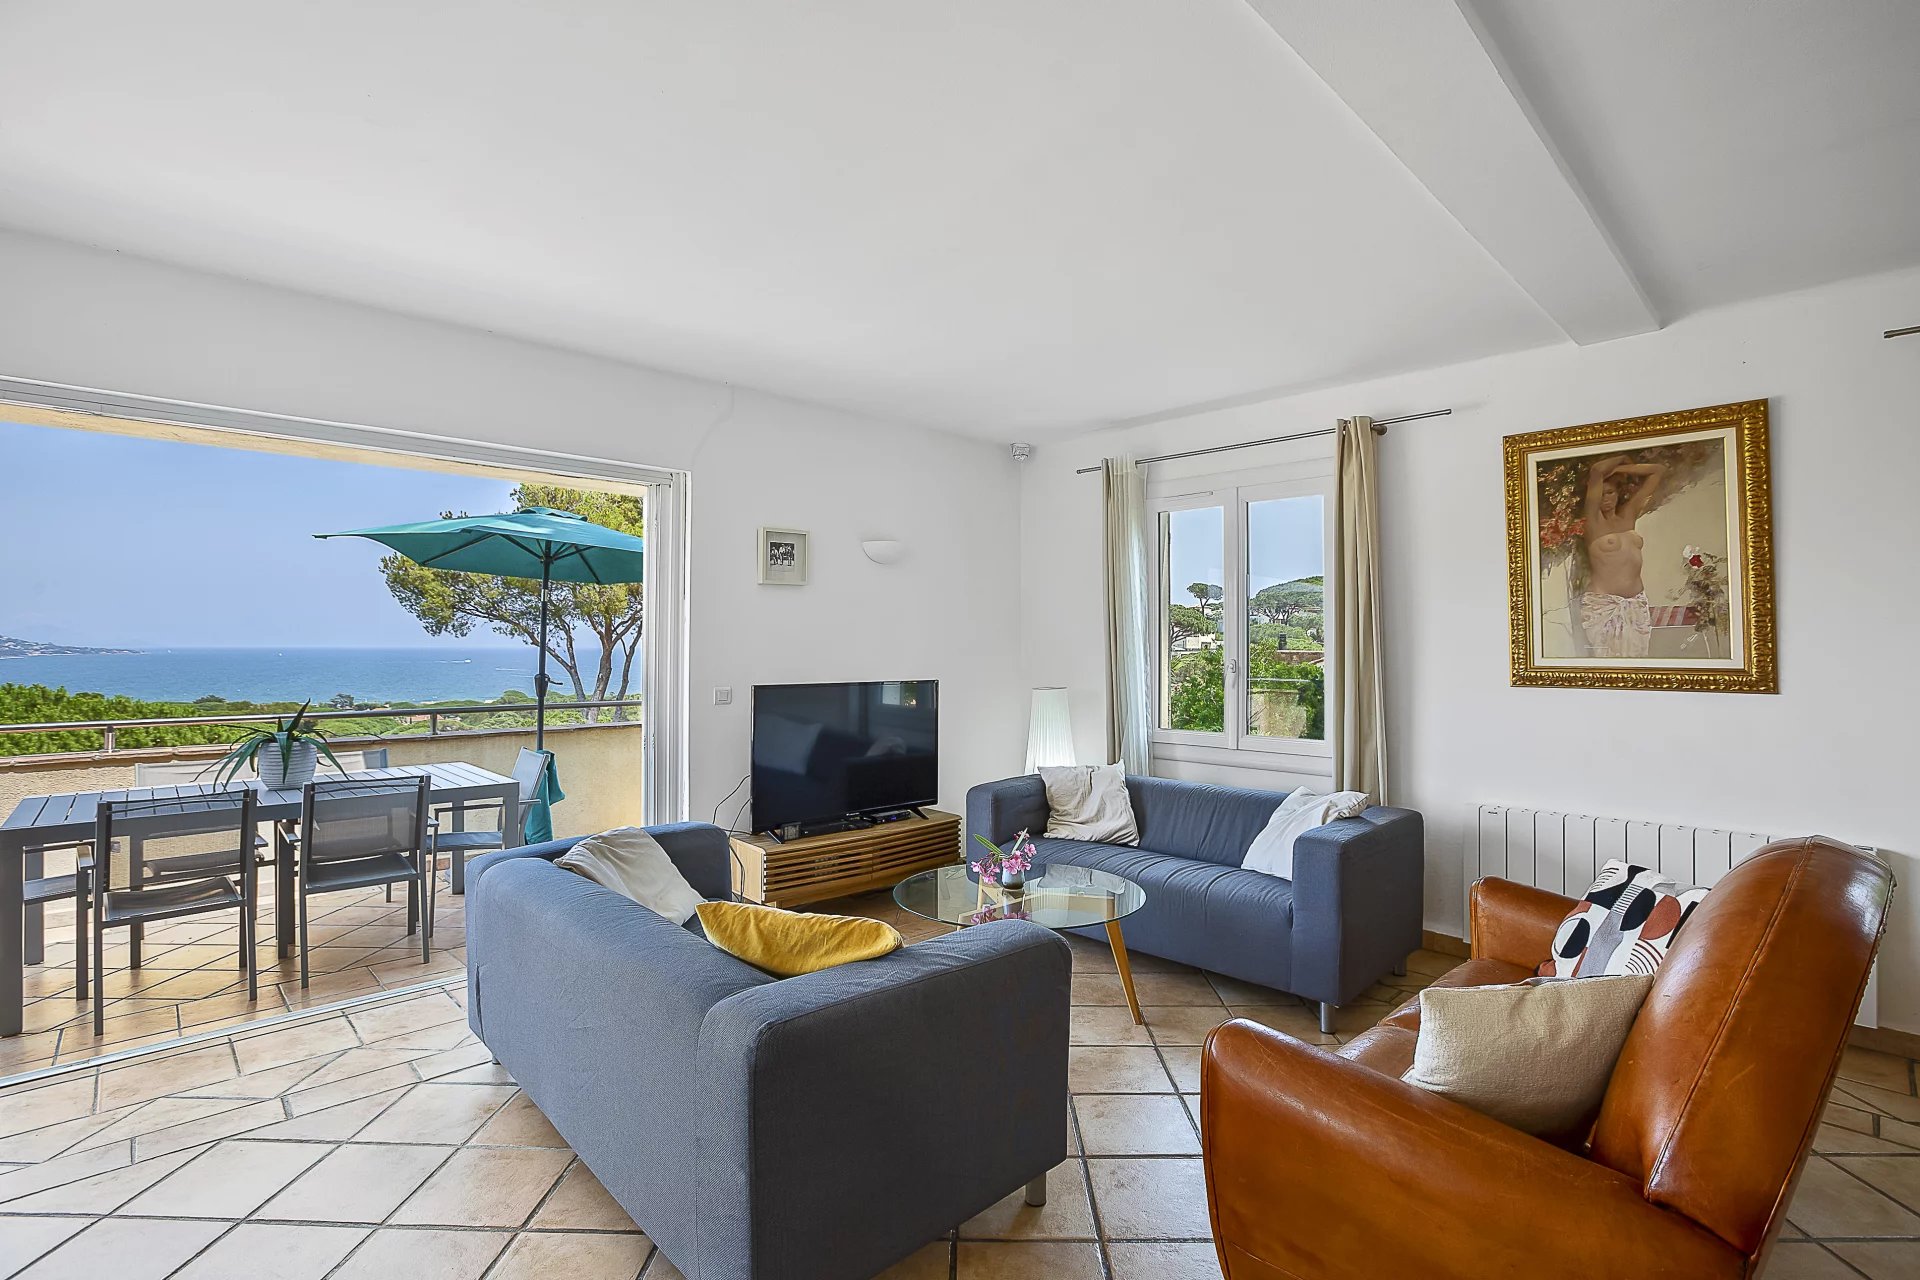 Beautiful renovated villa with swimming pool and stunning sea and mountain views - Sainte Maxime